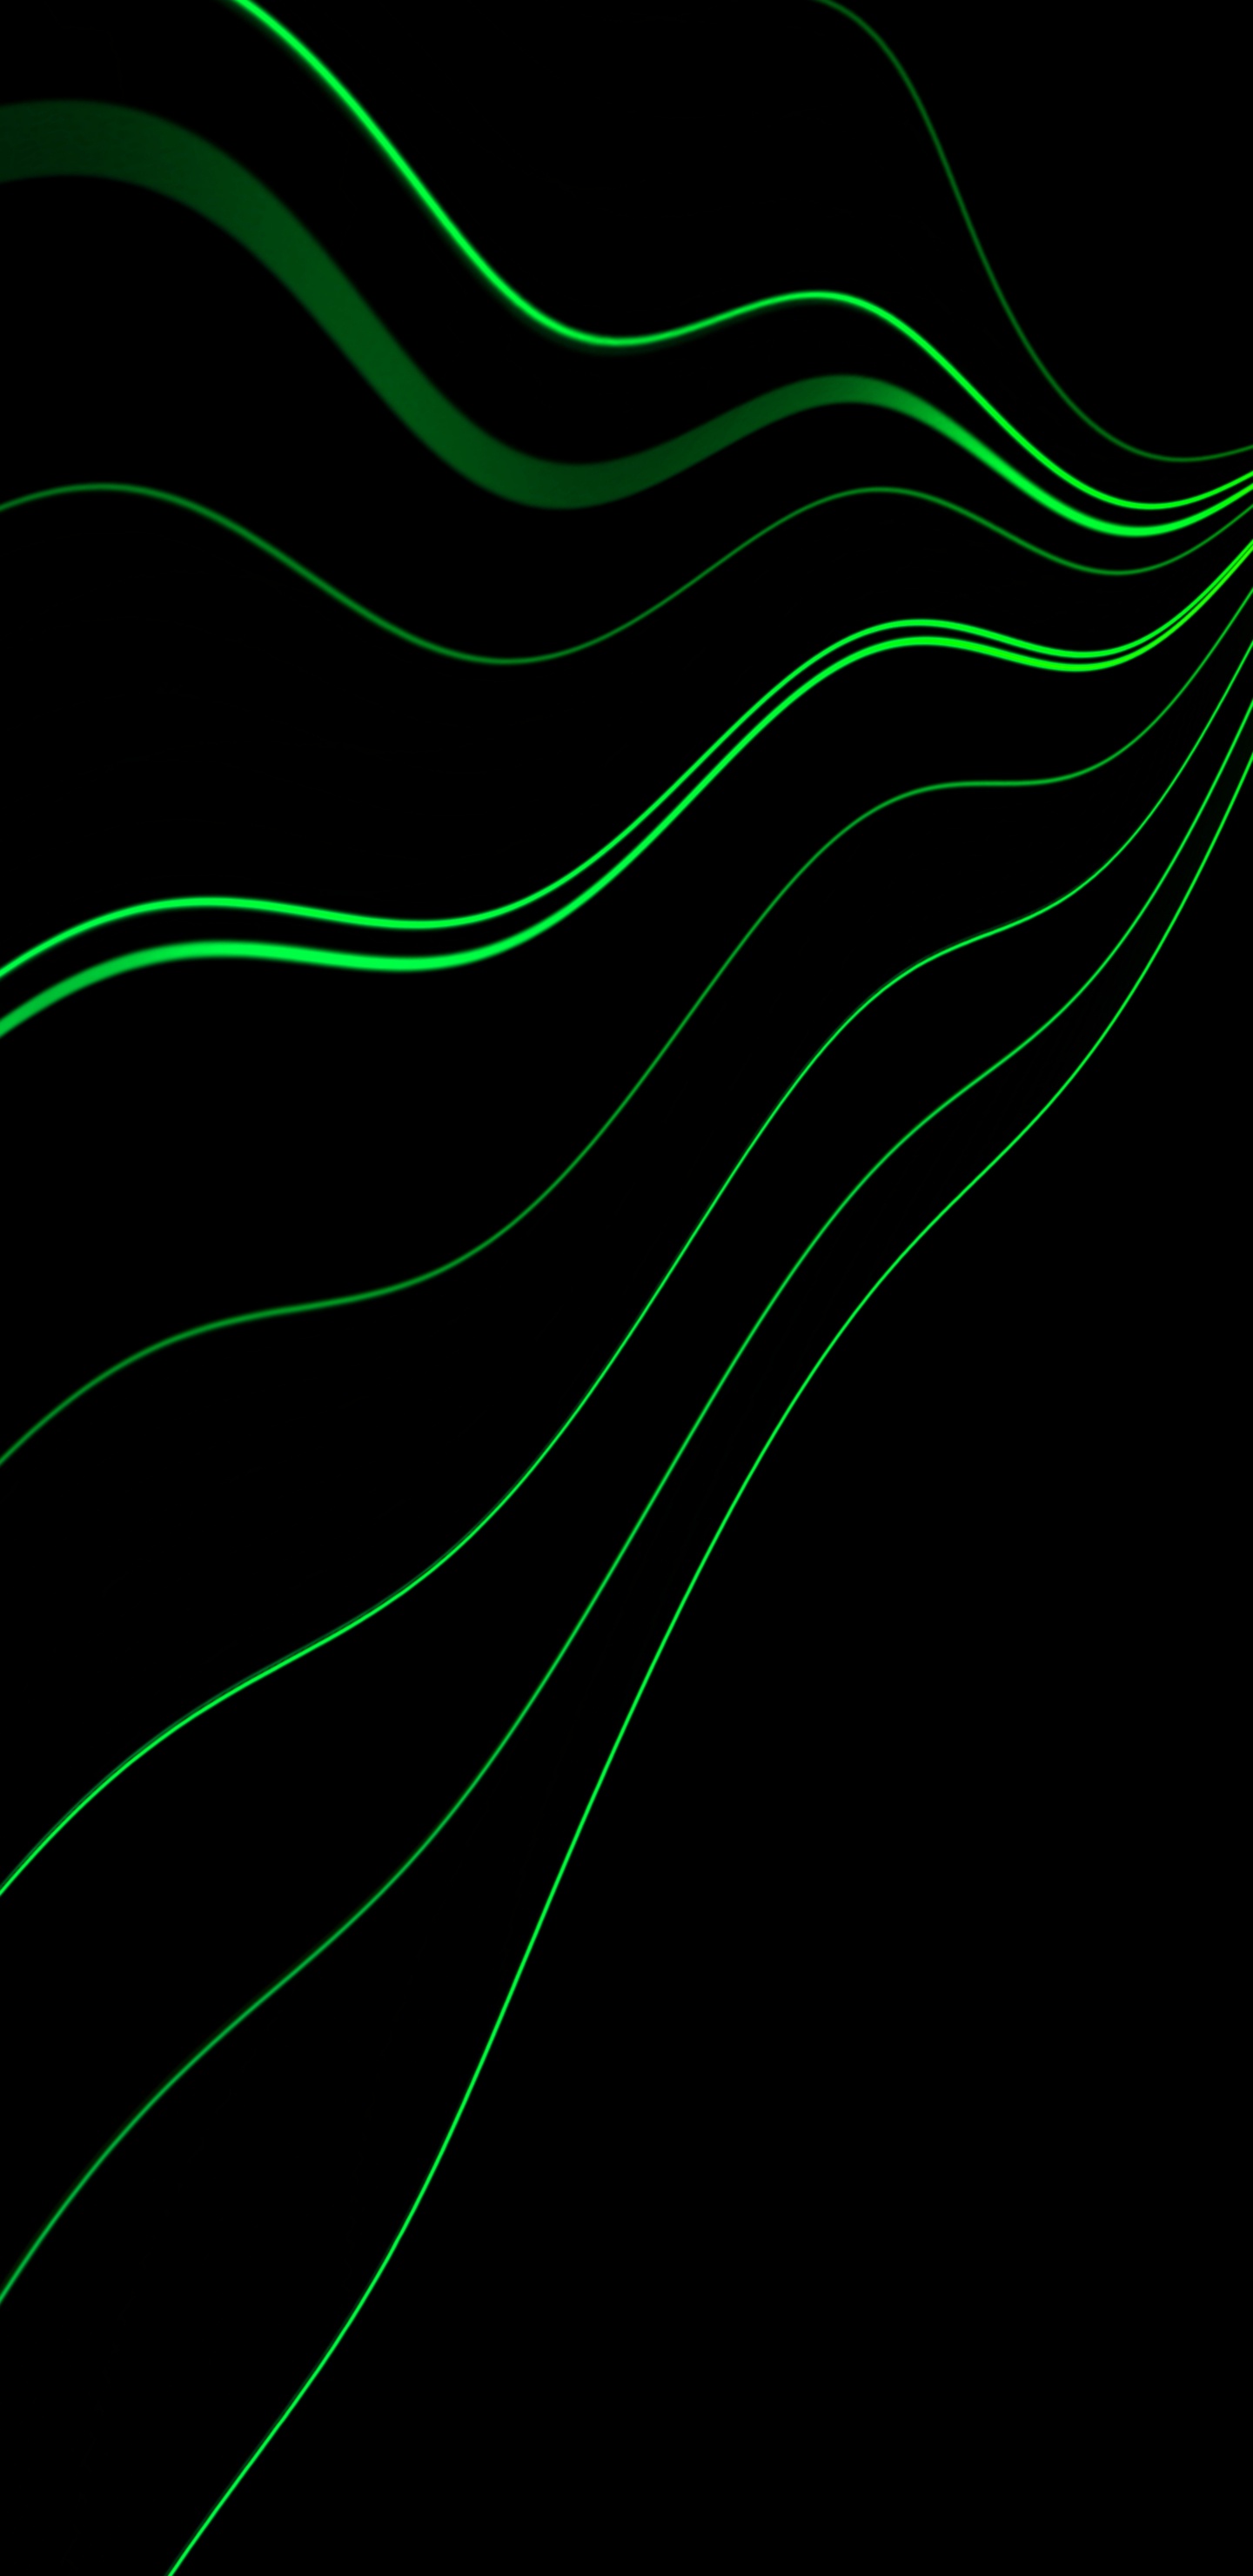 Green and White Line Illustration. Wallpaper in 1440x2960 Resolution